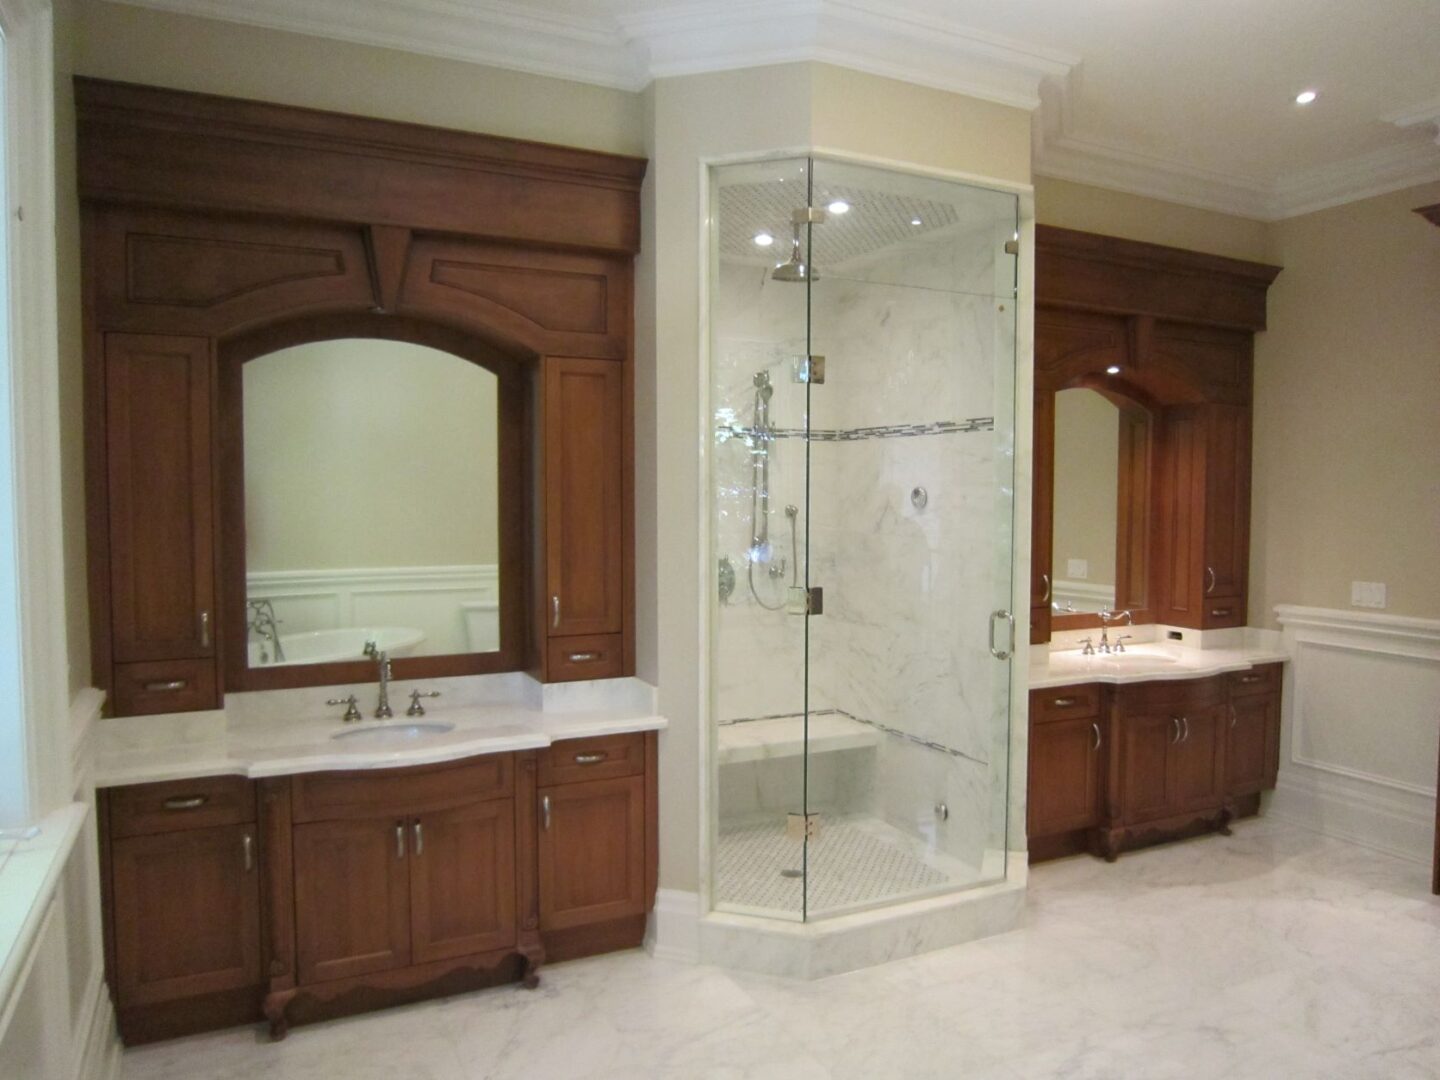 A Glass Door Shower With Two Sinks Side by Side